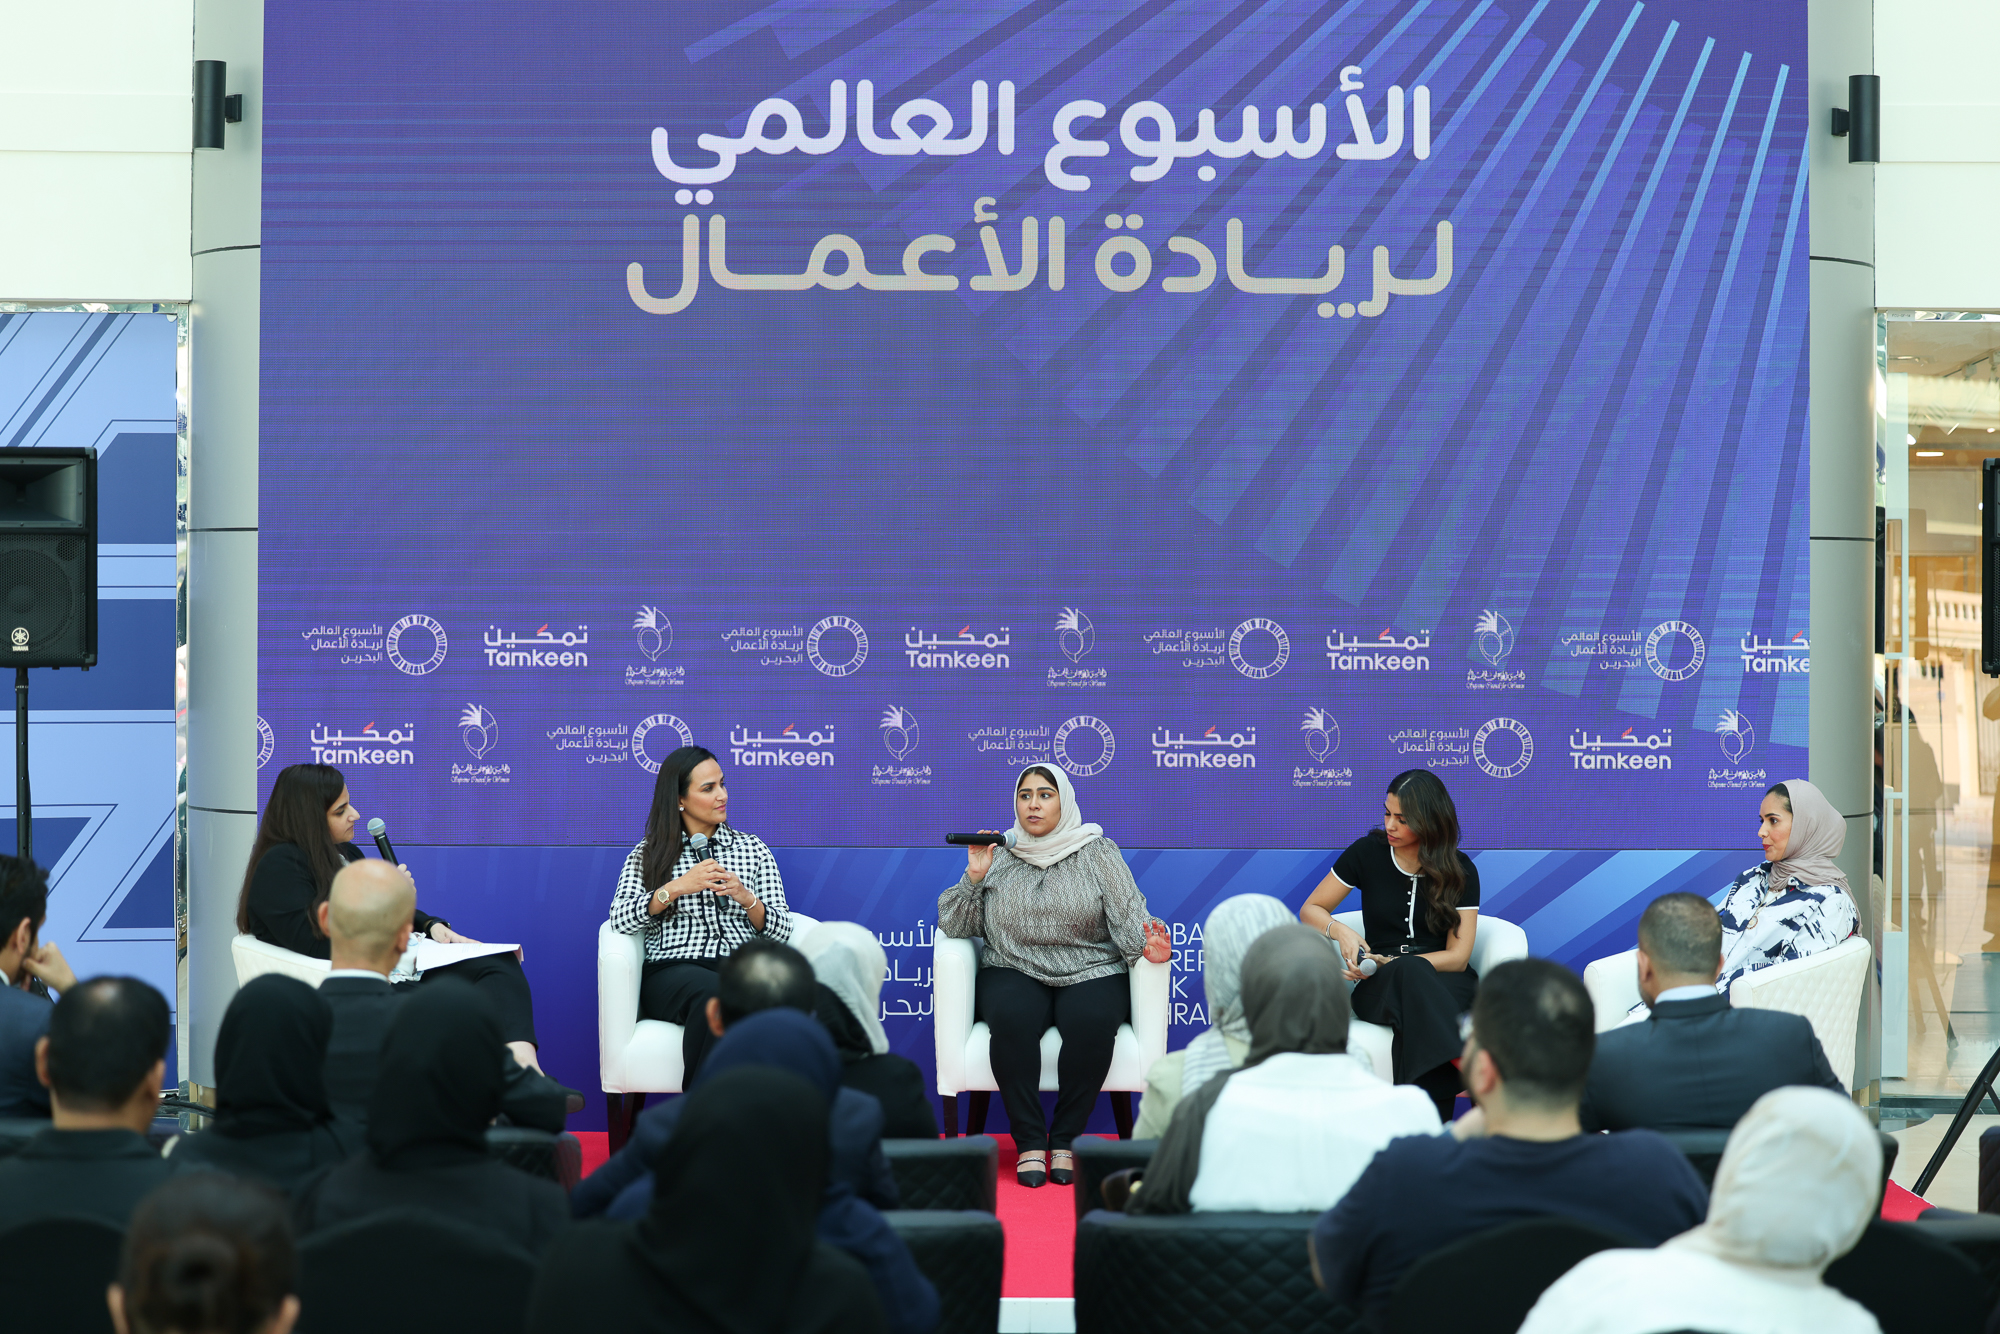 As Part of the Global Entrepreneurship Week Events “The Supreme Council for Women” and “Tamkeen” host Panel Discussion Featuring Bahraini Women Entrepreneurs to Address Opportunities and Challenges in Several Sectors